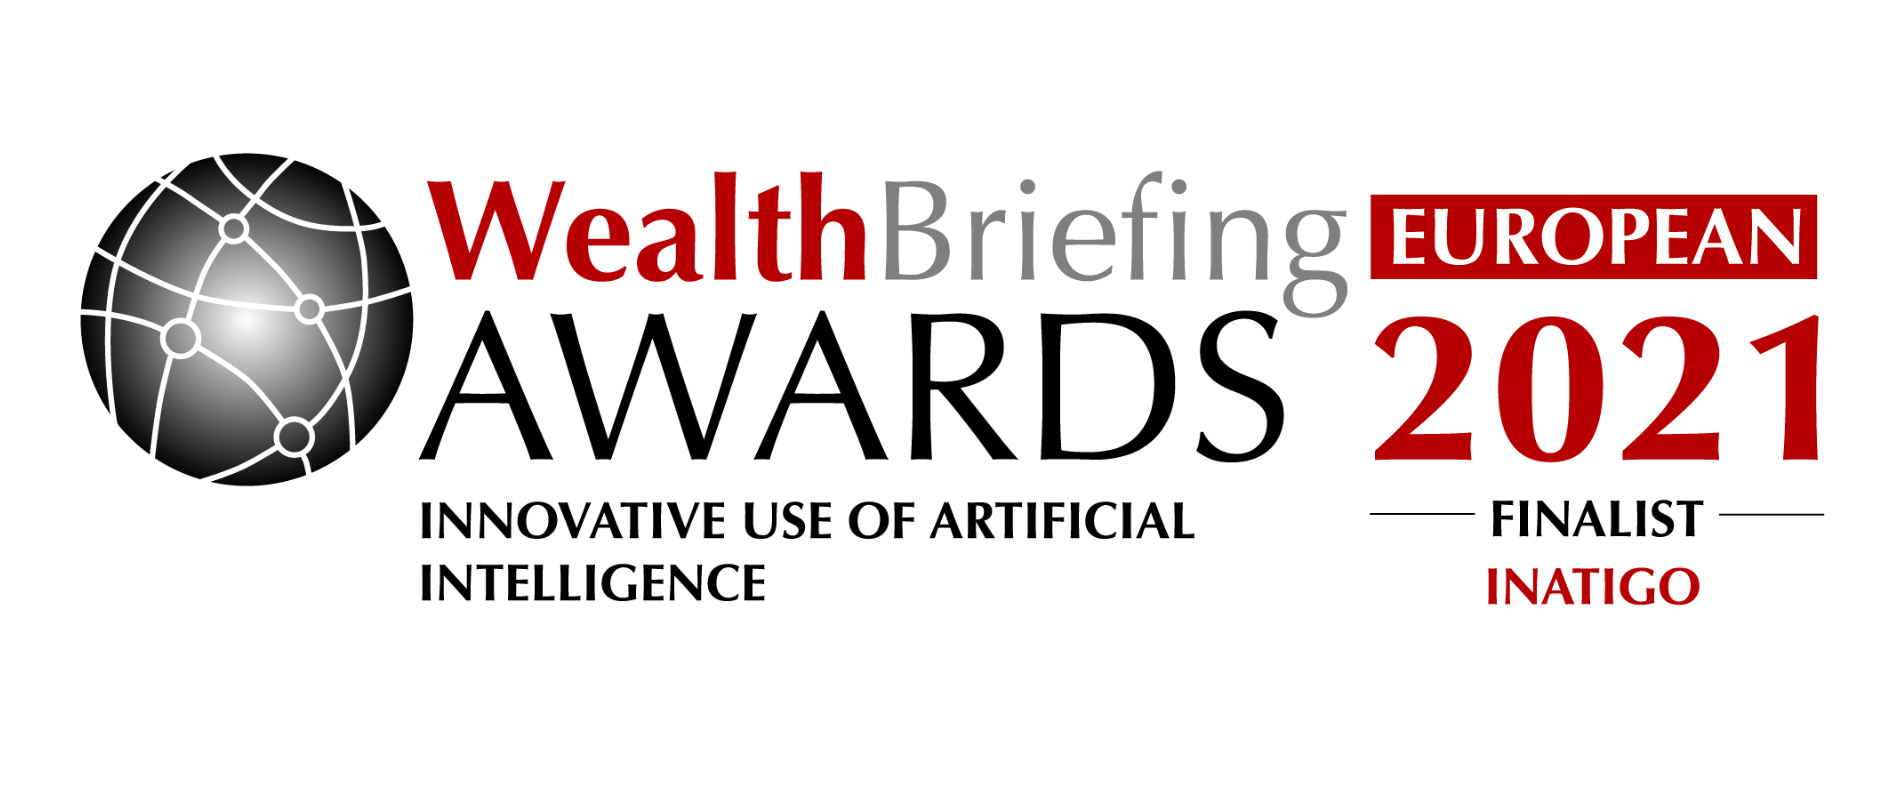 INATIGO Named A Finalist In ‘innovative Use Of Artificial Intelligence’ At The Wealthbriefing European Awards 2021